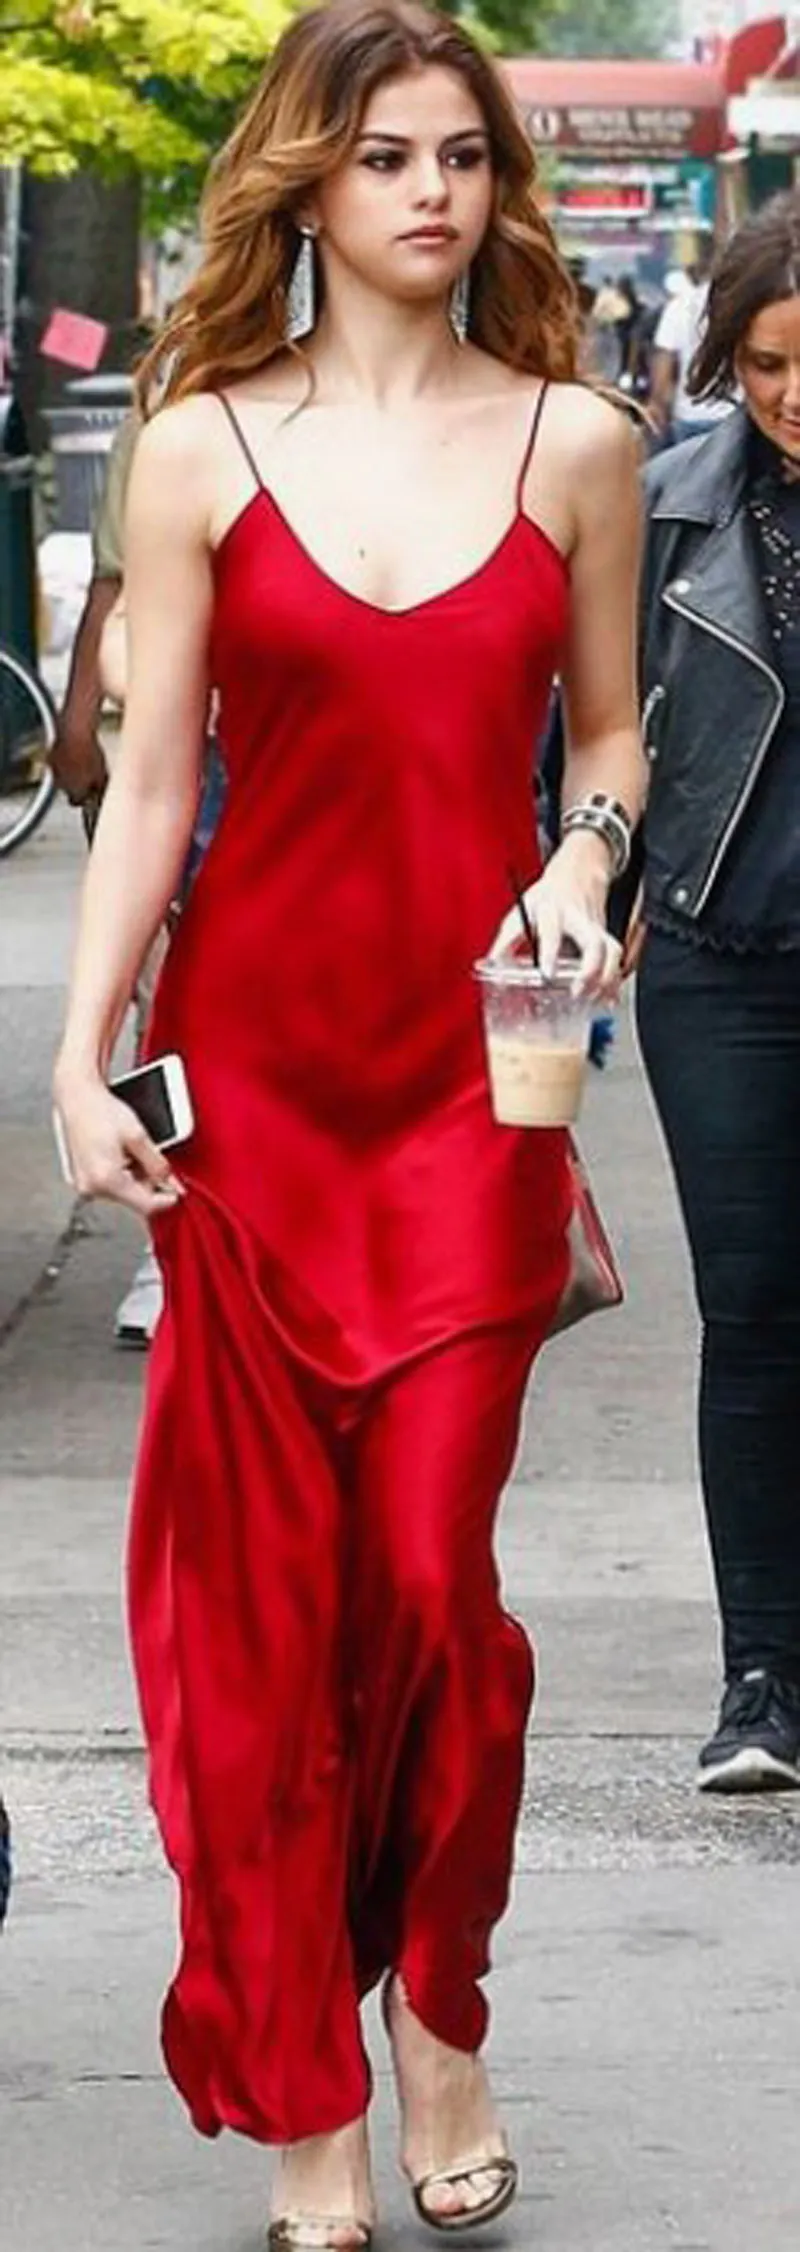 Selena Gomez Sizzles In Two Plunging Crimson Red Prom Dresses For Shoot Street Style Party Dress